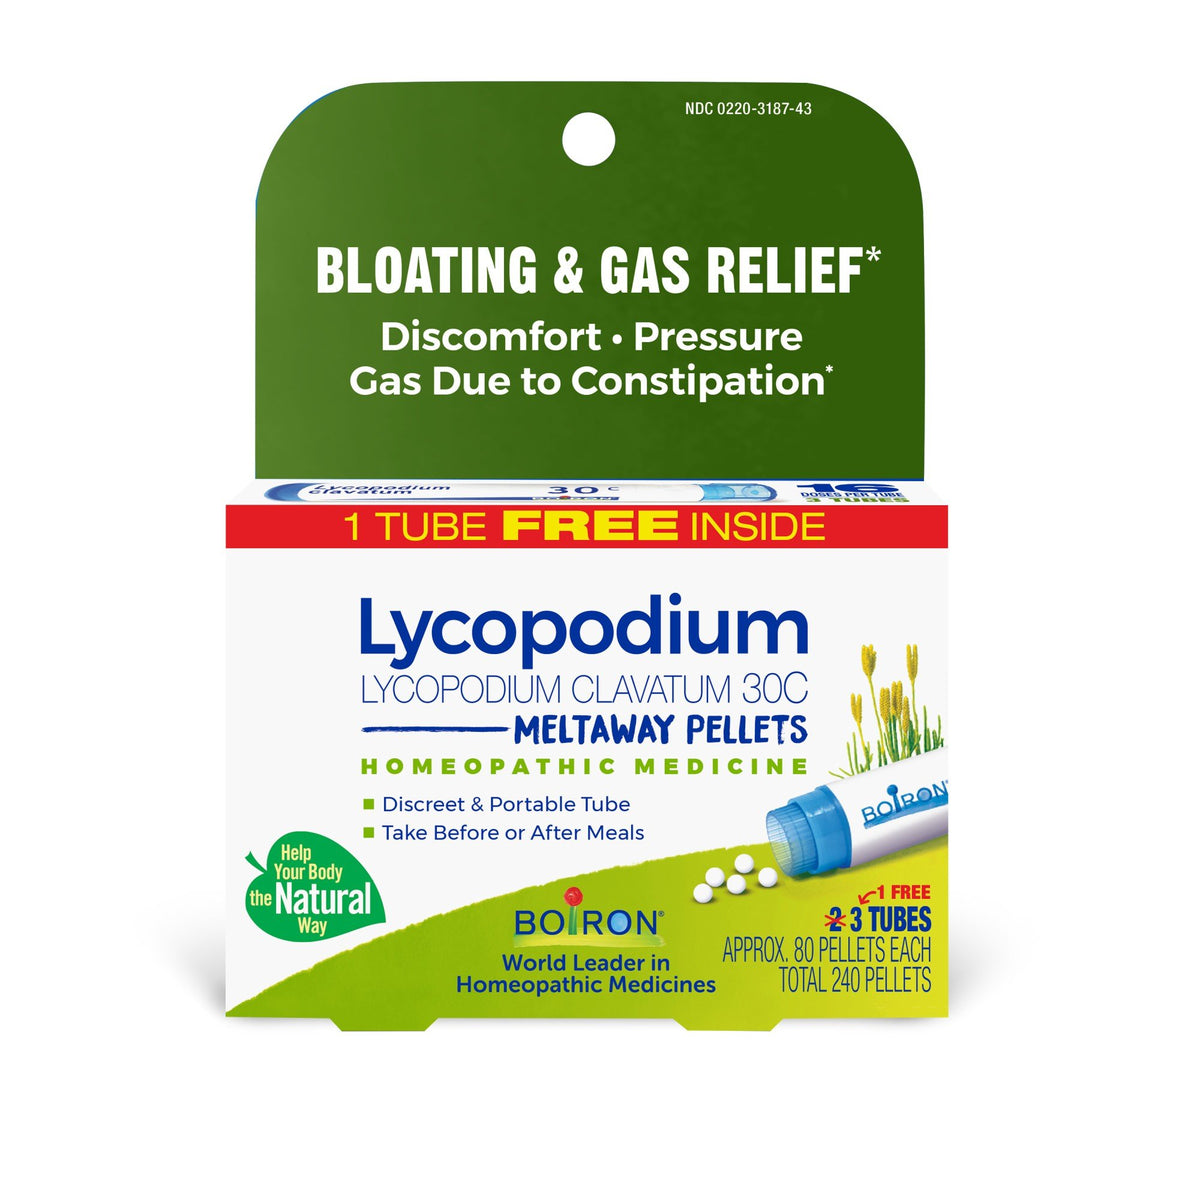 Boiron Lycopodium Clavatum 30C 3 MDT Homeopathic Medicine For Bloating &amp; Gas Relief 3 Pack Pellet